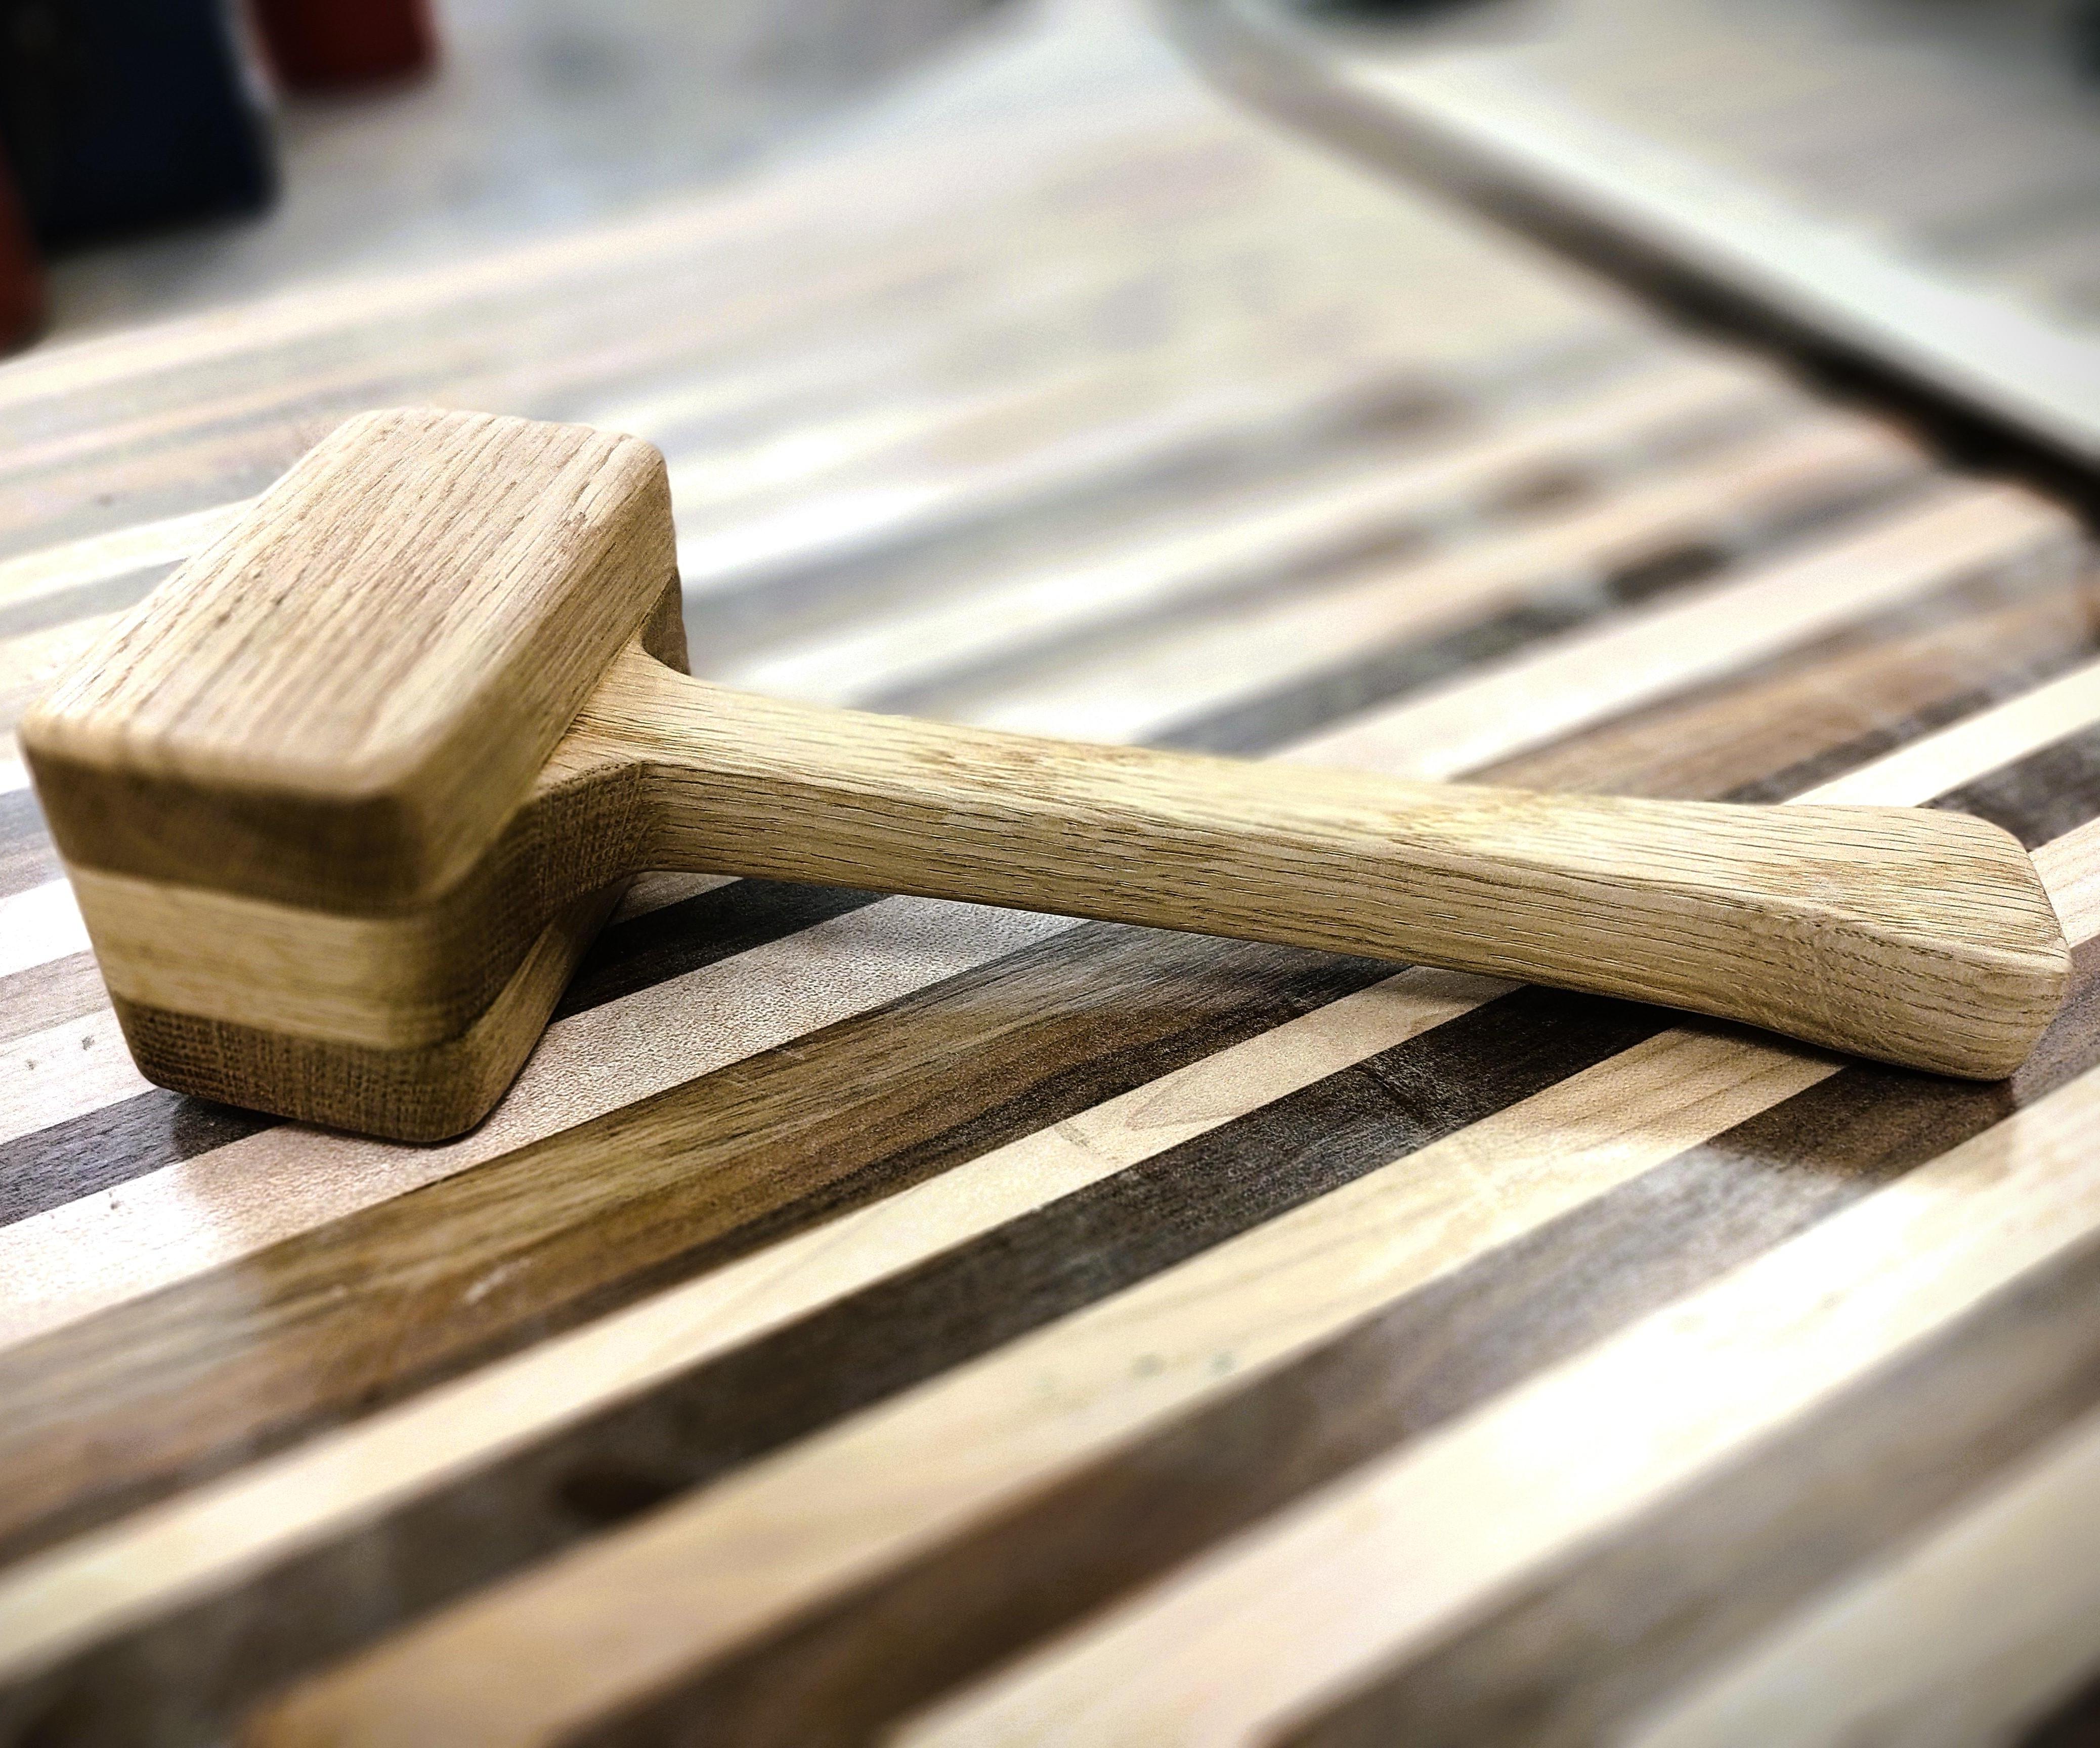 MAKE YOUR OWN WOODEN MALLET WITH A CNC MACHINE